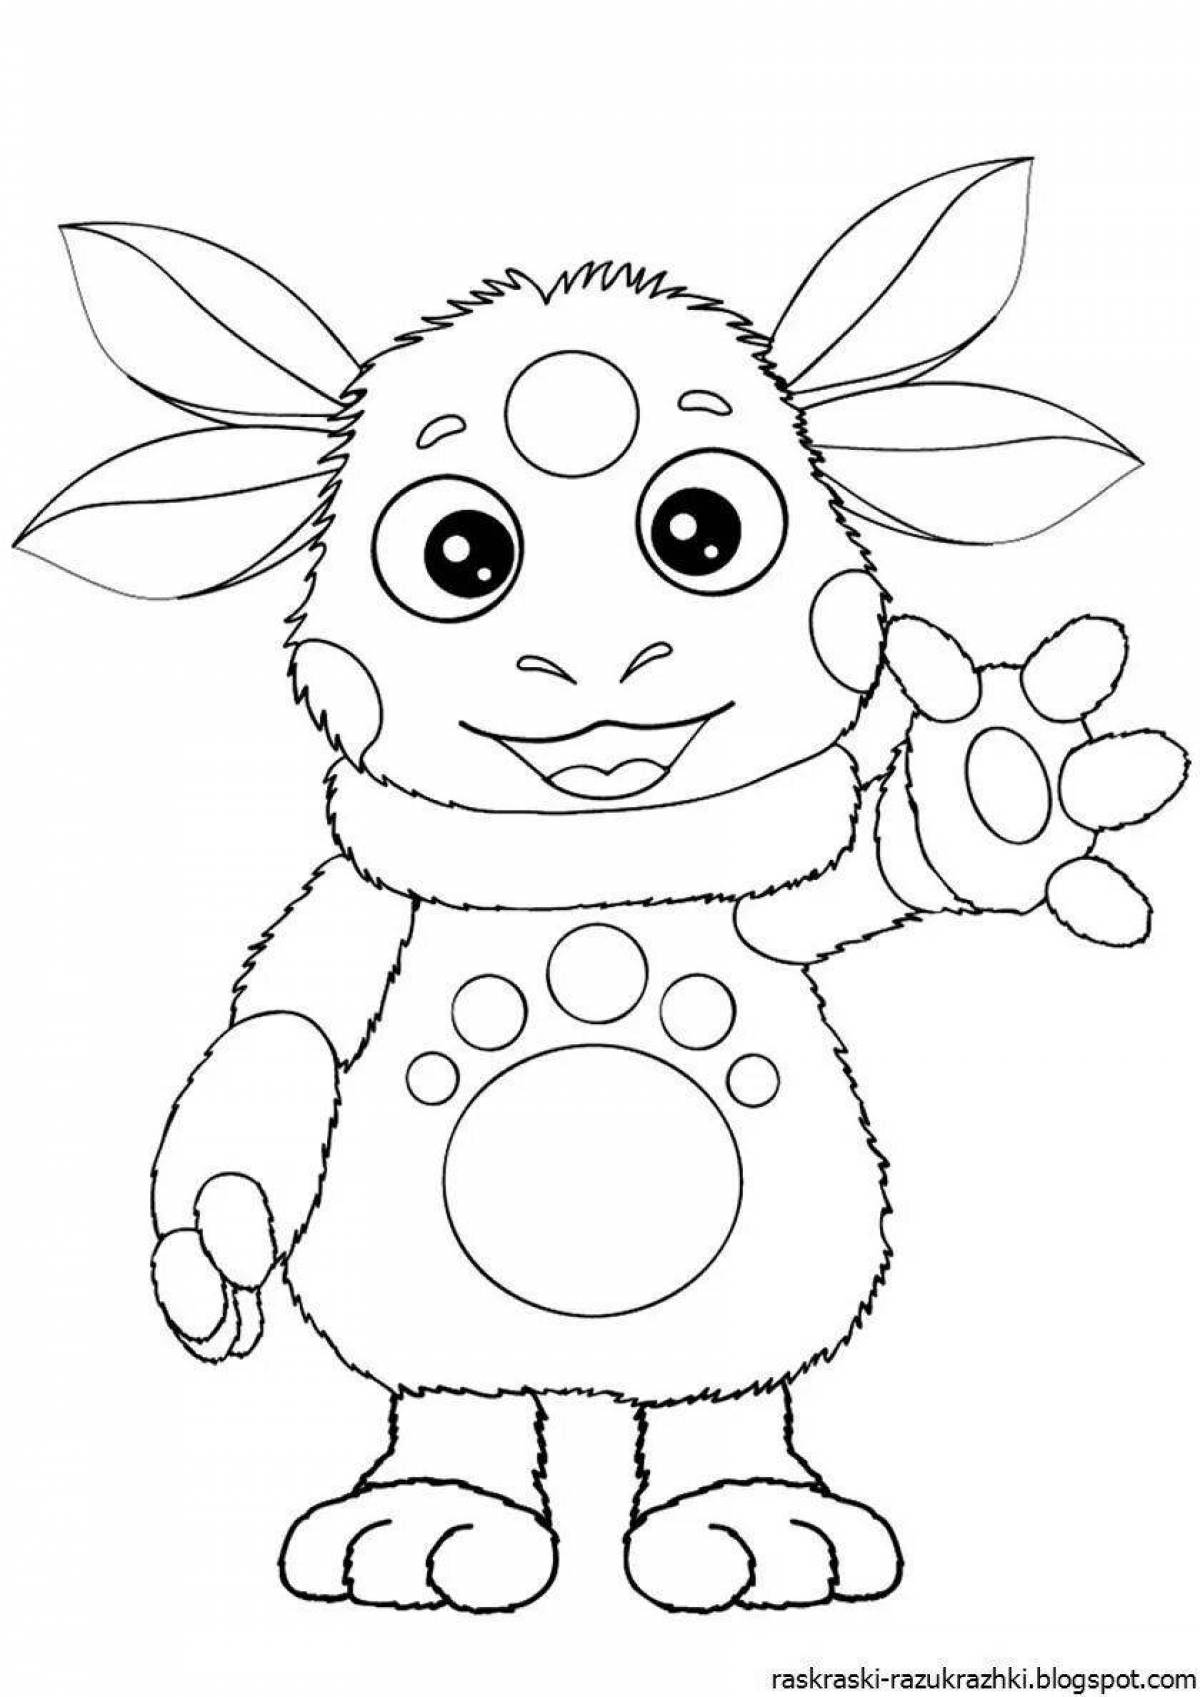 Adorable cartoon coloring book for 4 year olds